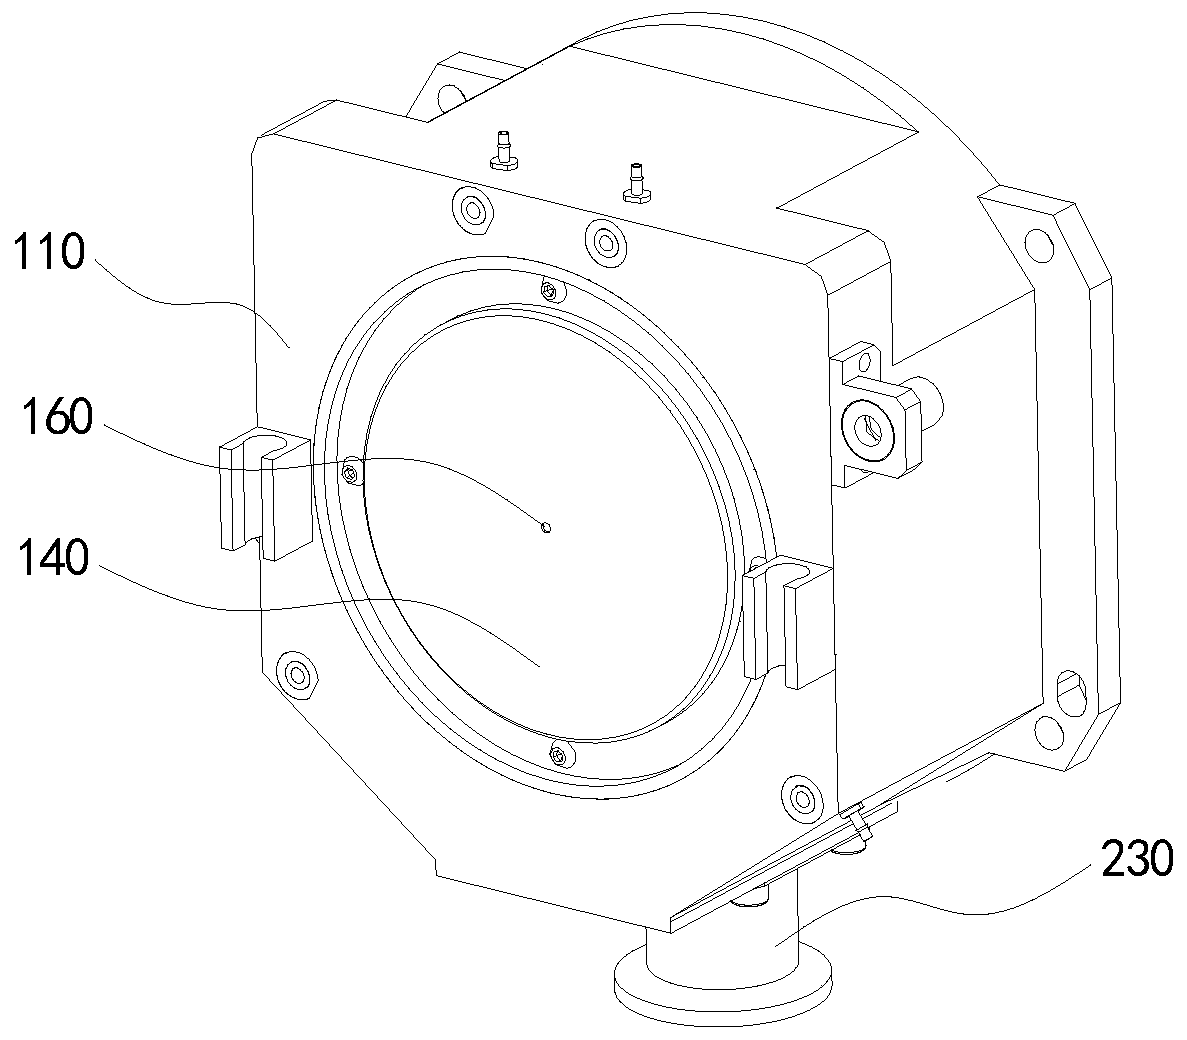 Ion transmission interface device